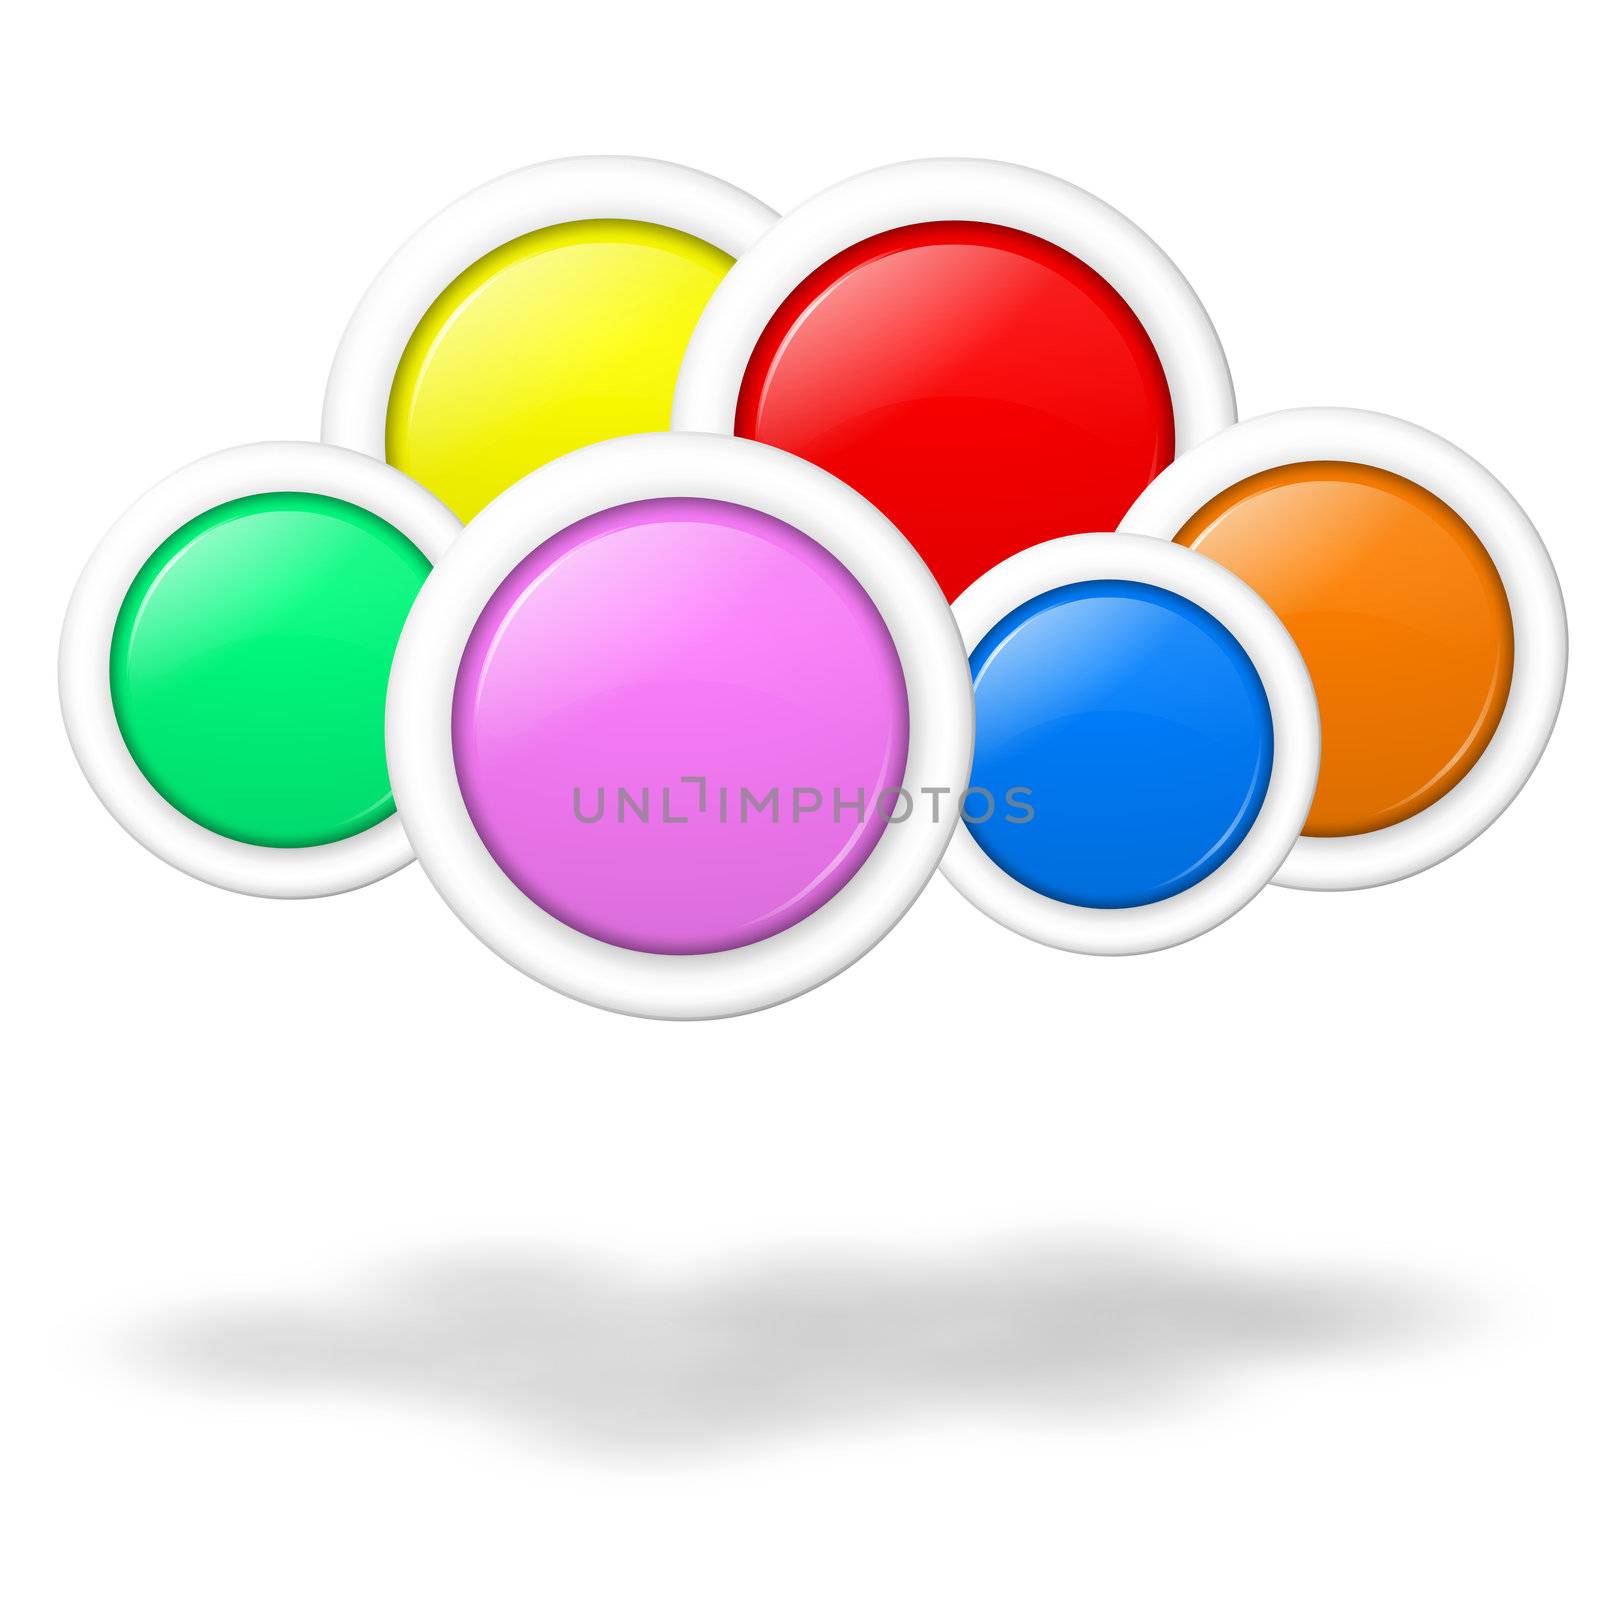 Cloud computing concept illustration formed by blank colorful buttons